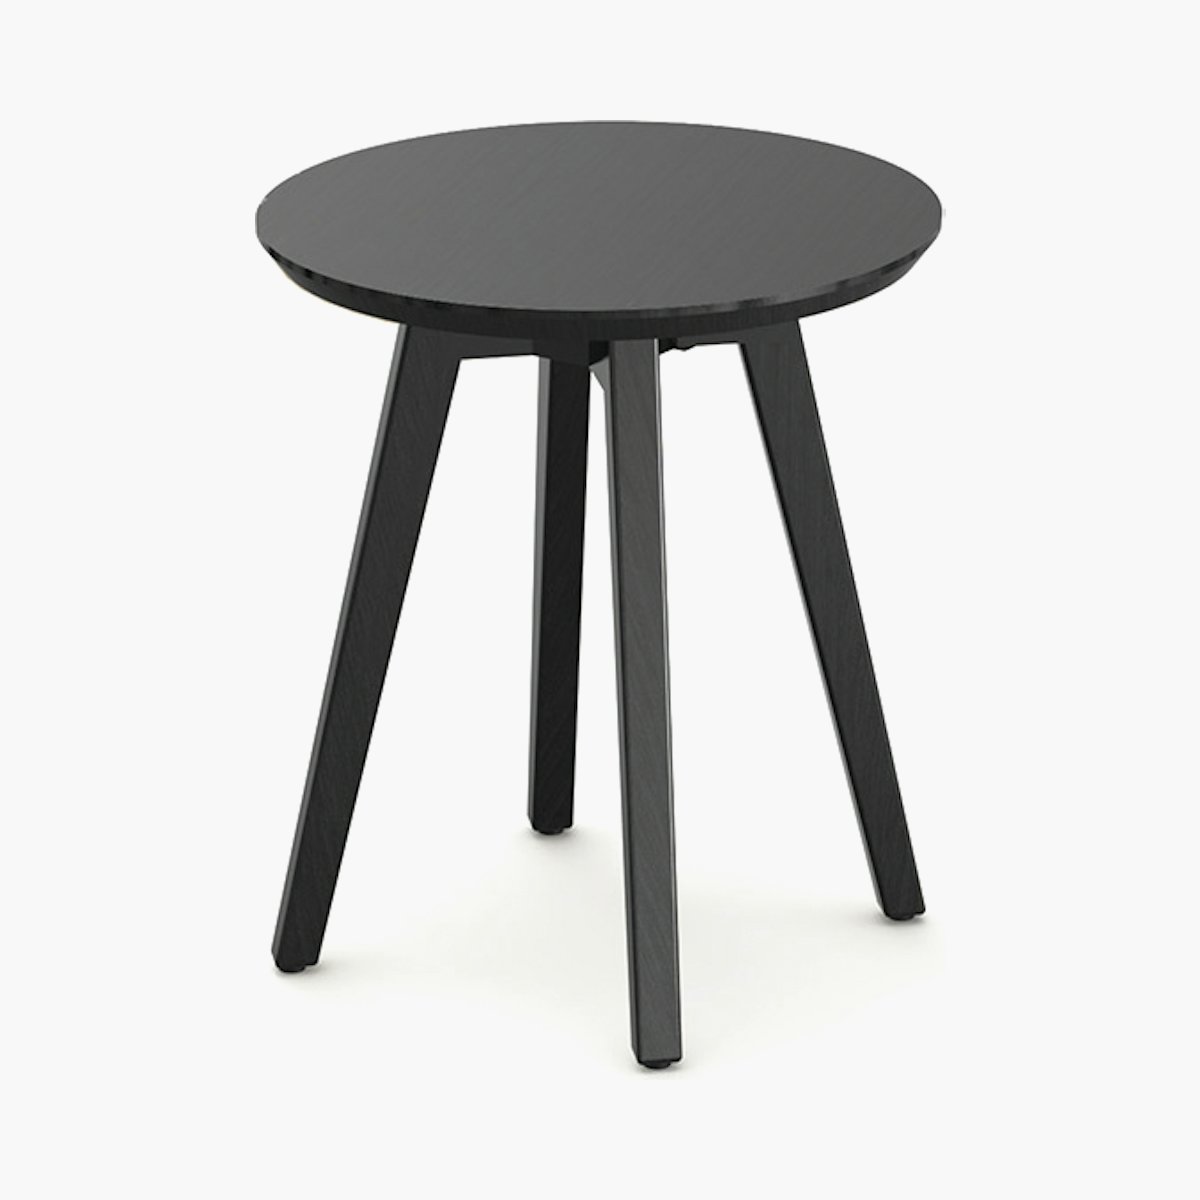 Risom Side Table, Round